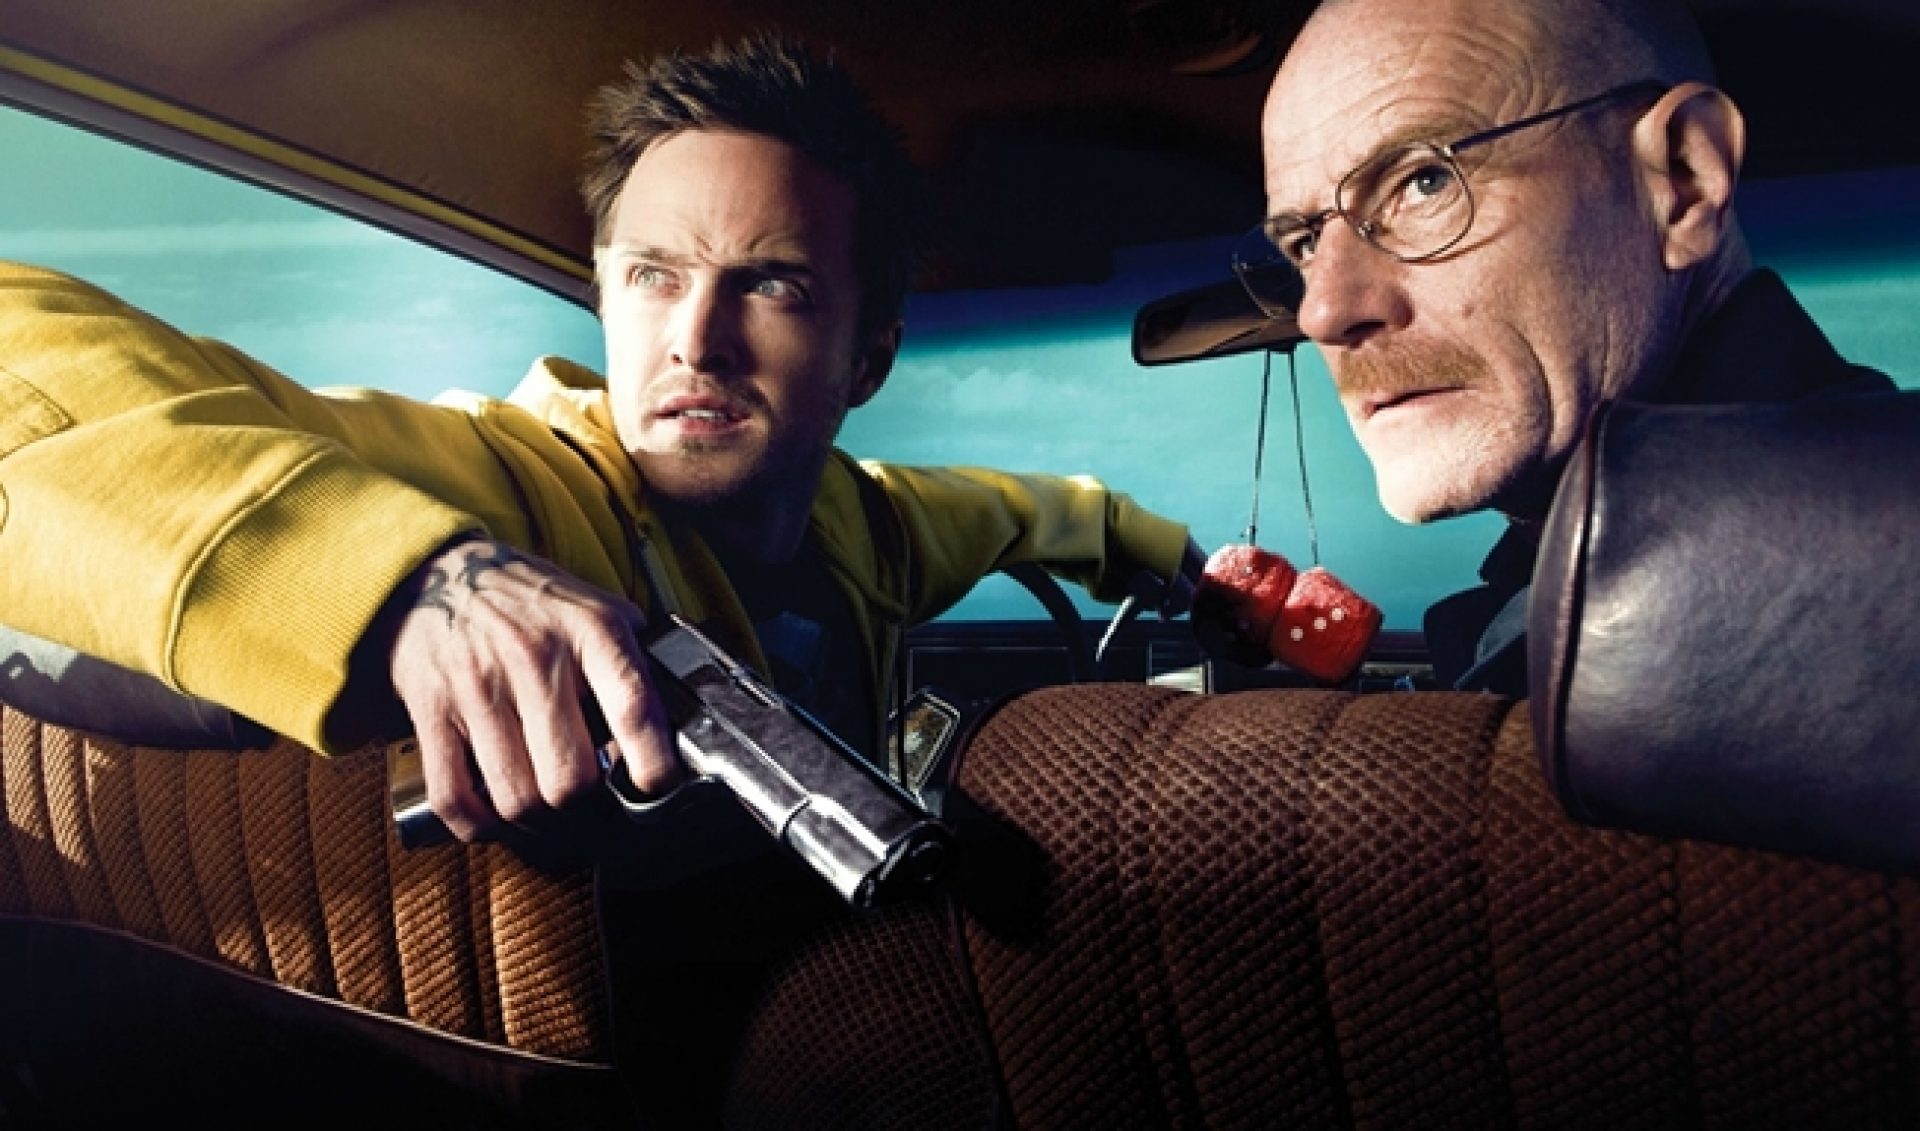 ‘Breaking Bad’ Farewell Event To Be Live Streamed On YouTube